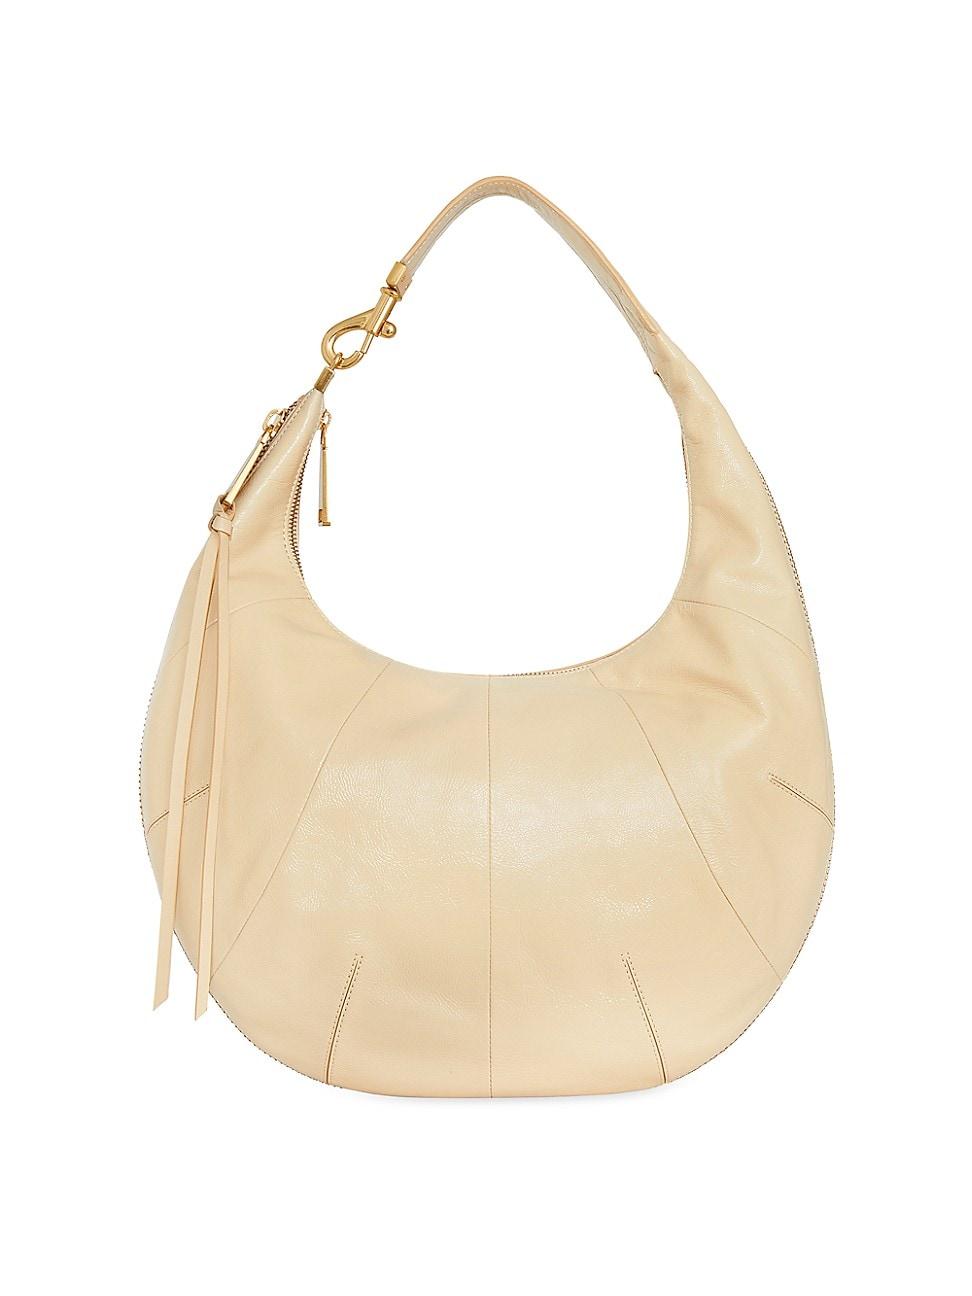 Rebecca Minkoff Croissant Leather Hobo Bag in White | Lyst